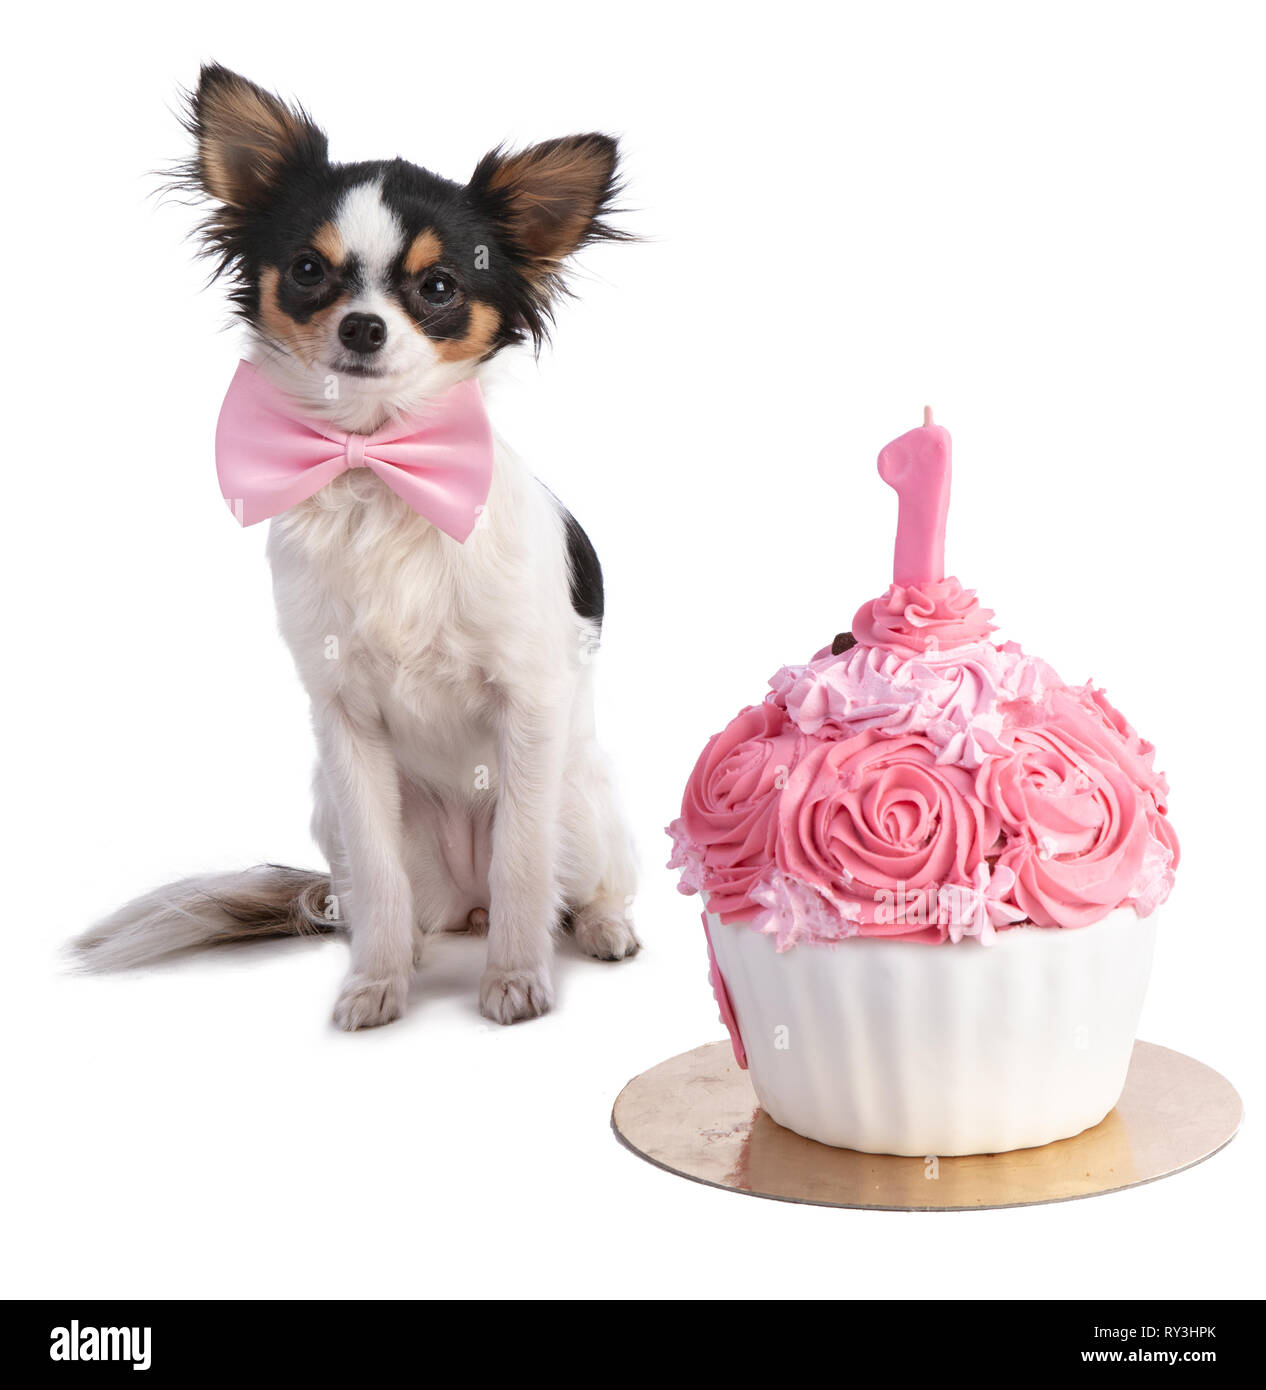 Chihuahua in front of her a pink birthday cake on a white background Stock Photo